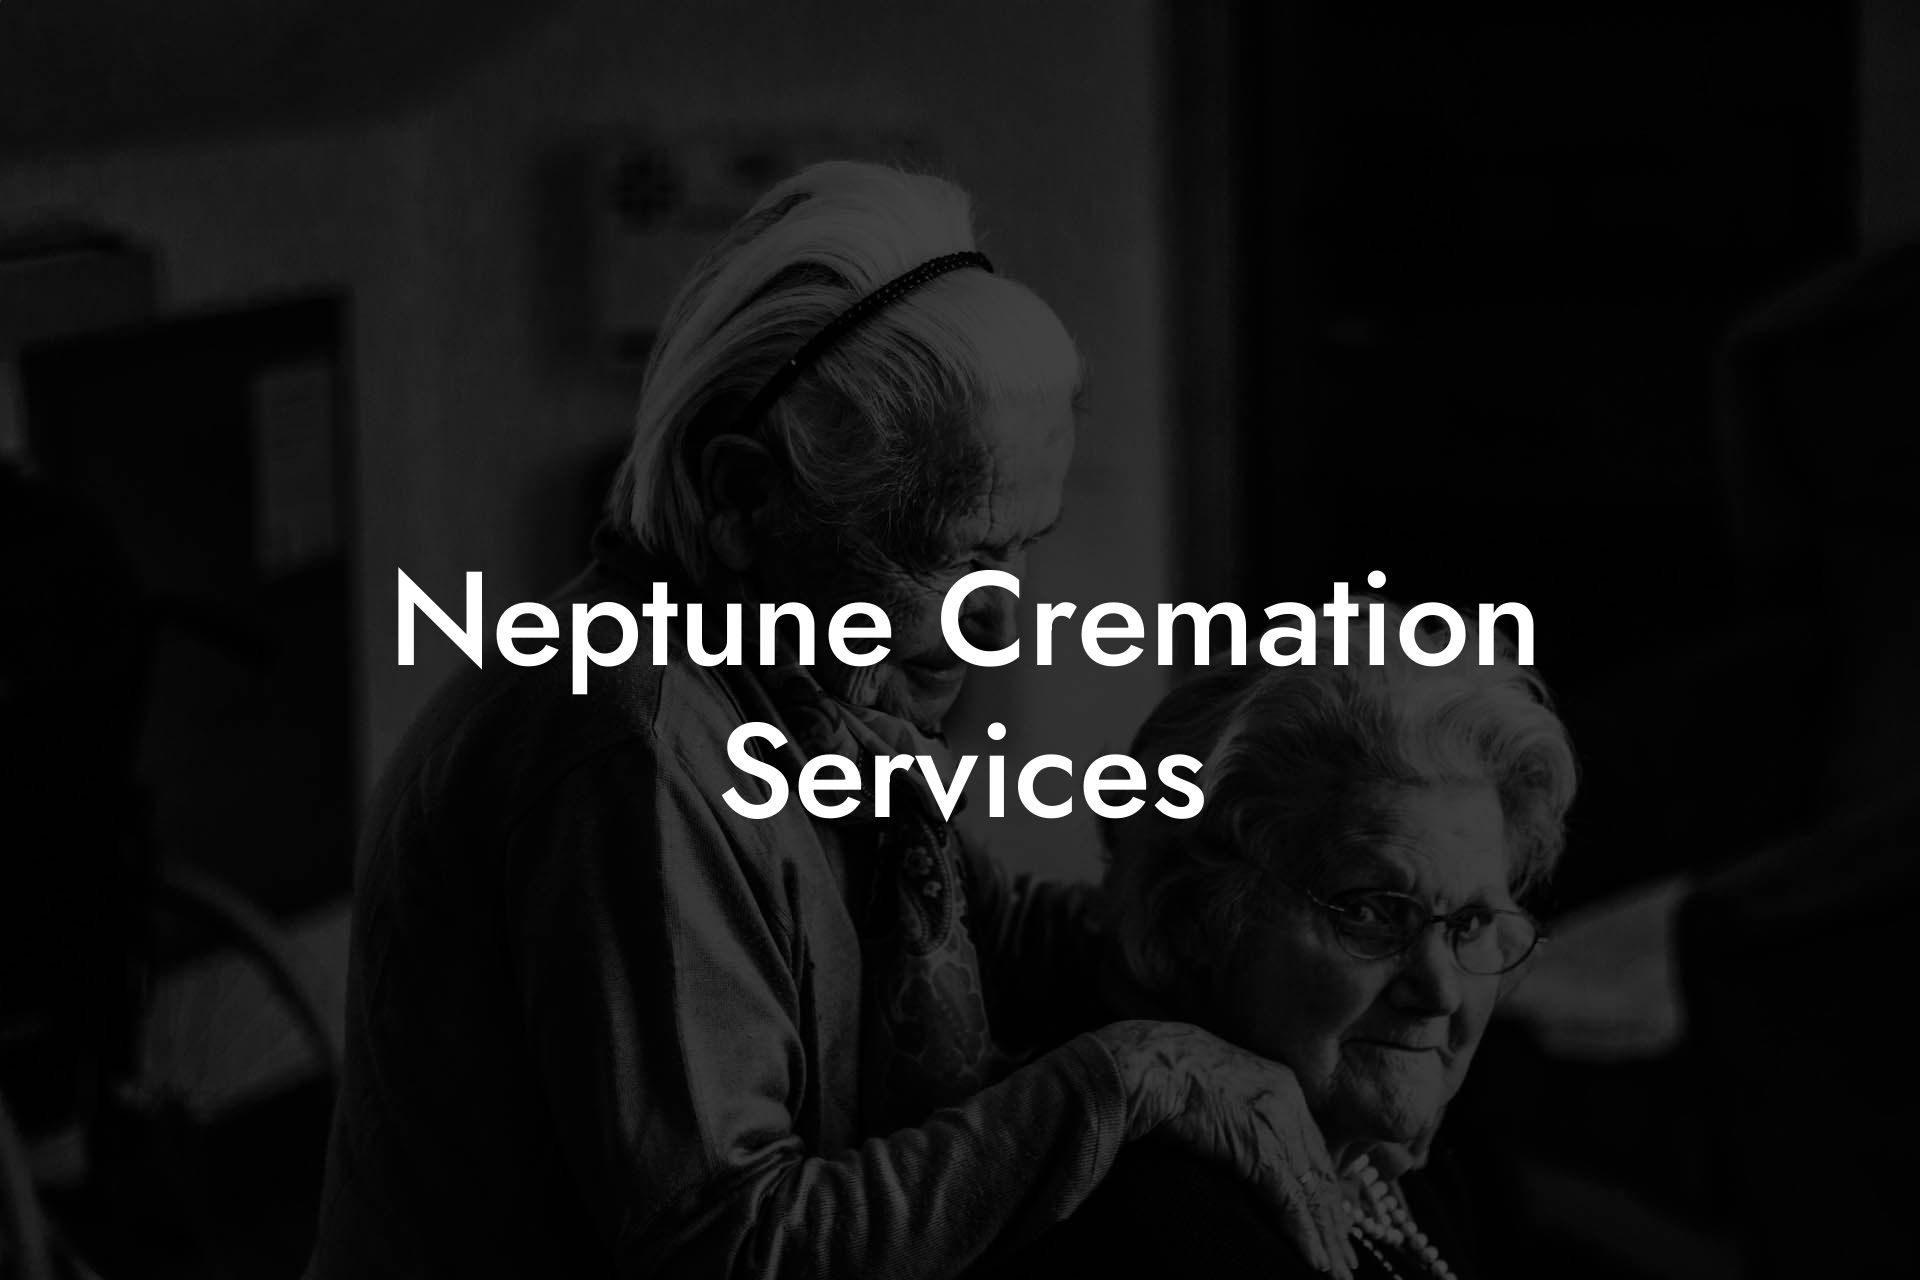 Neptune Cremation Services